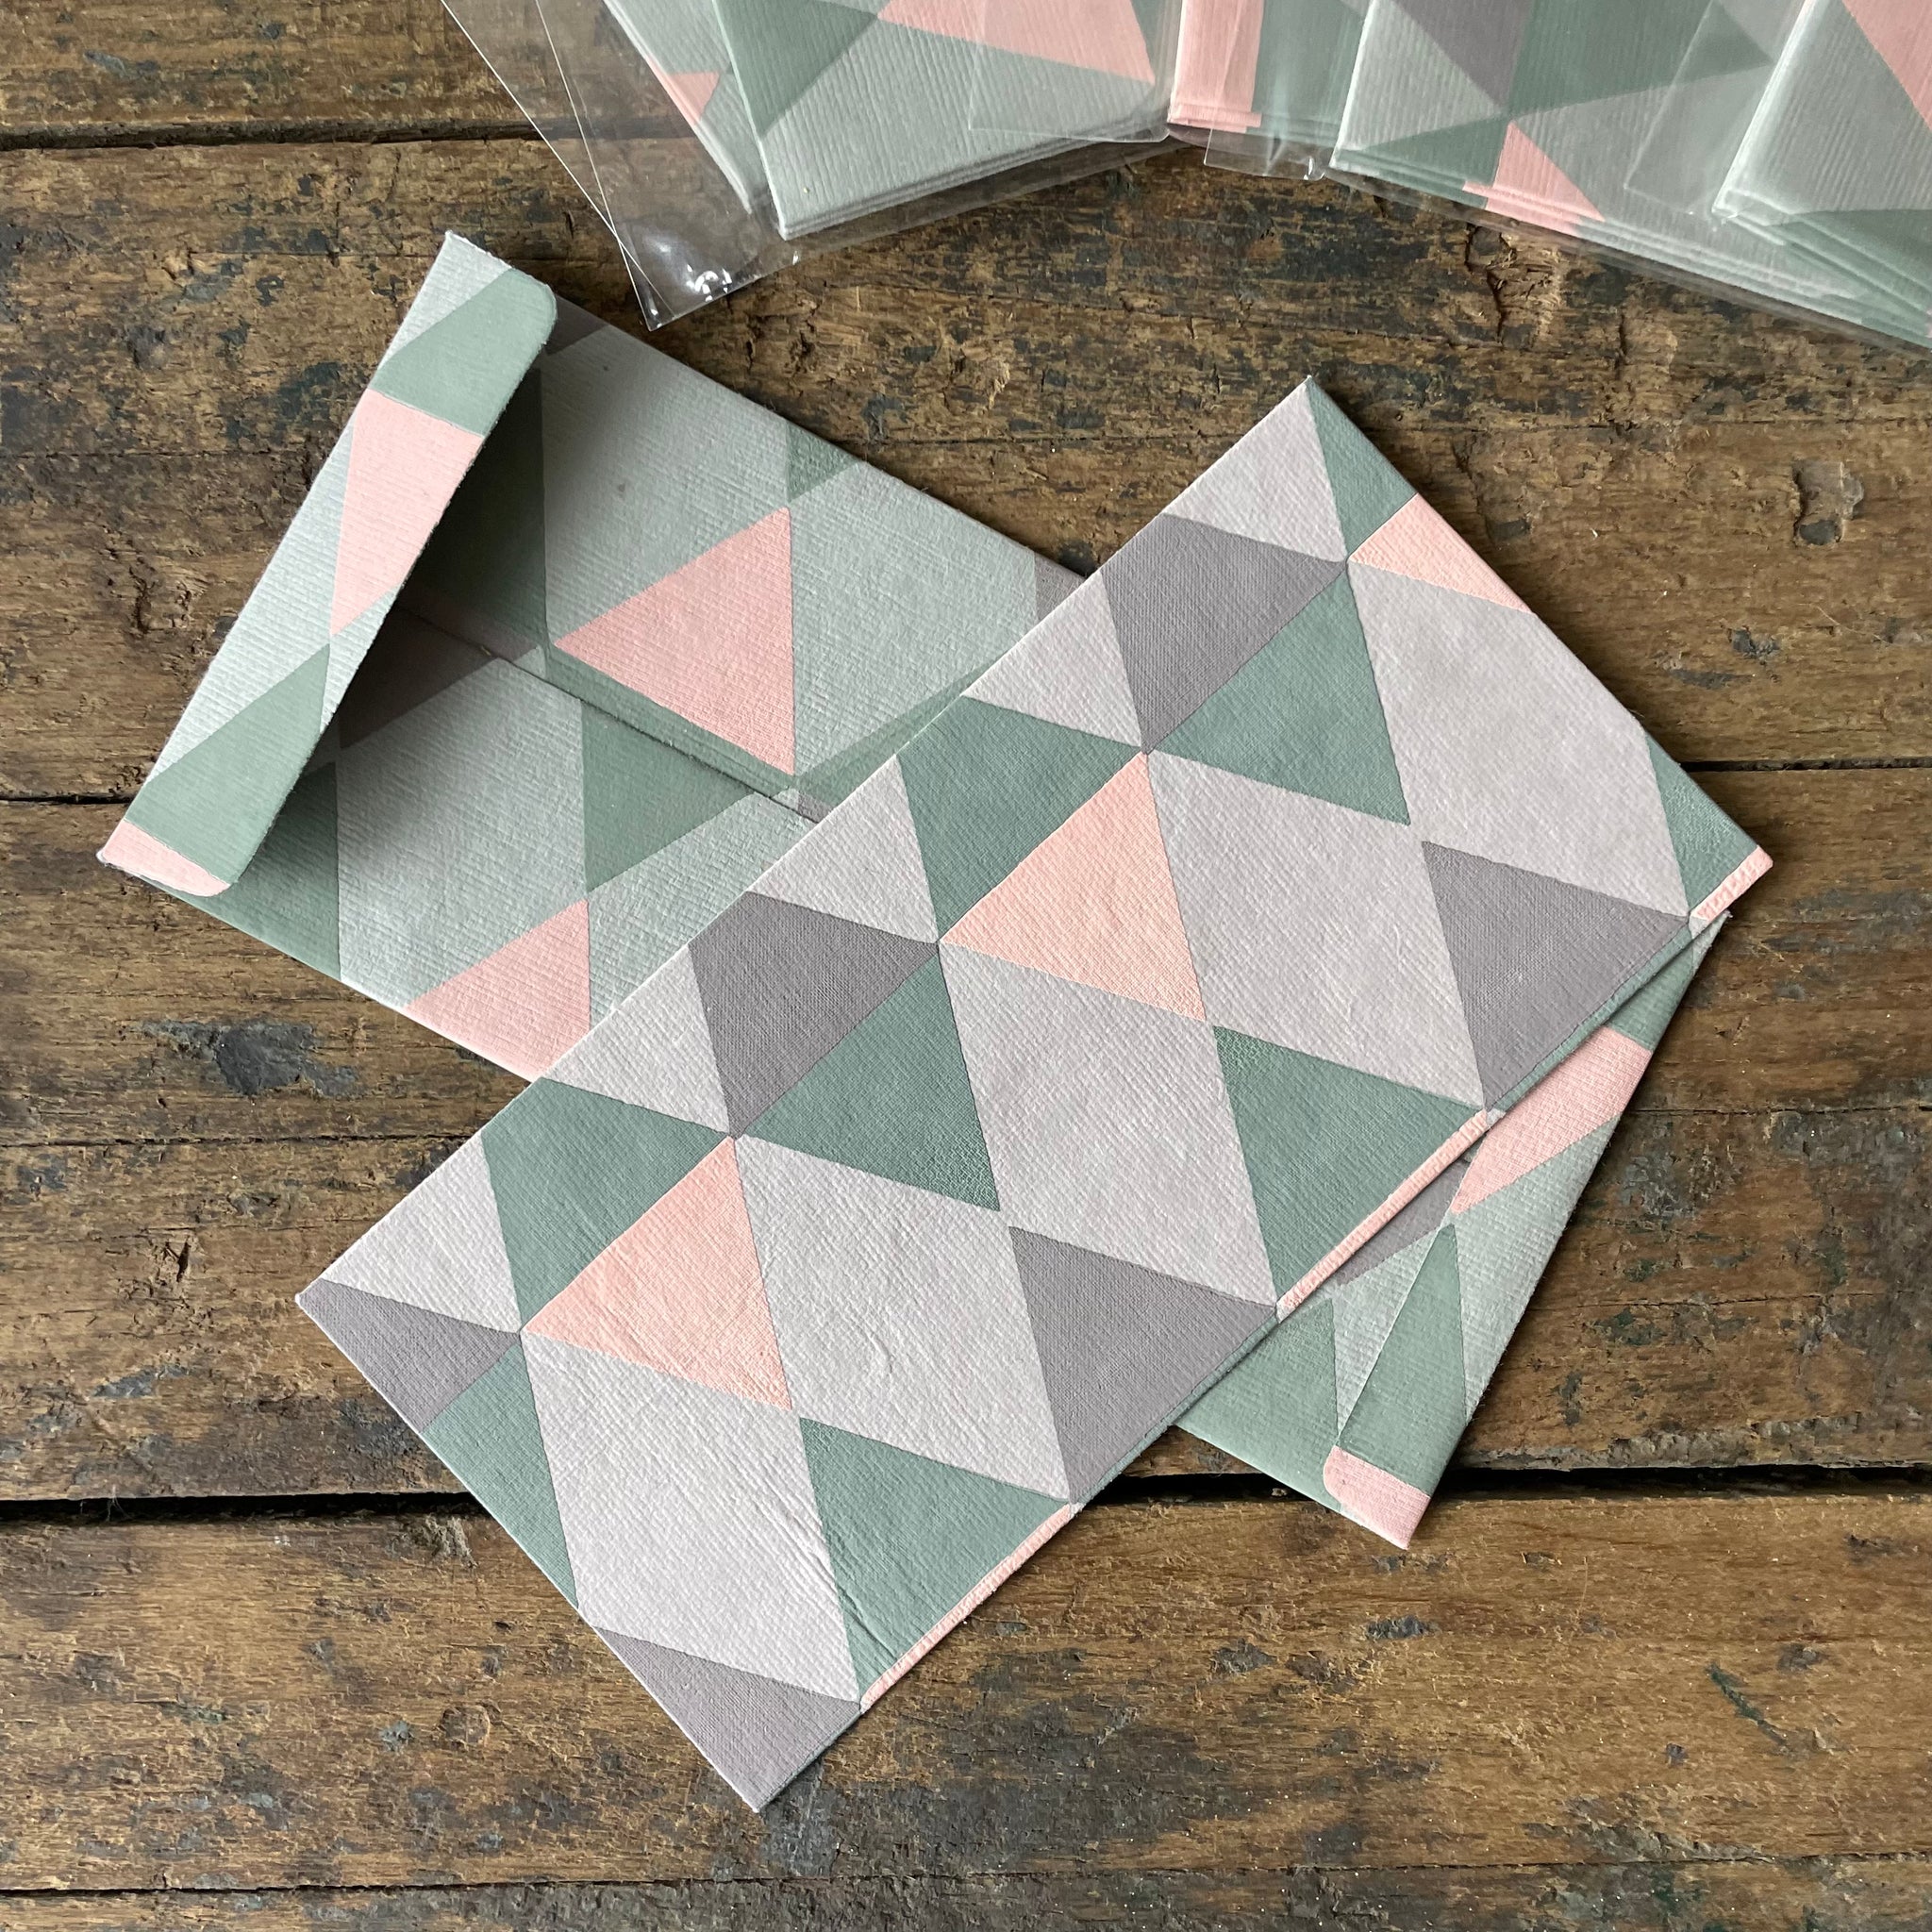 Hand Made Paper Stationery Trio, in Cool Tones By Hataguchi Collective